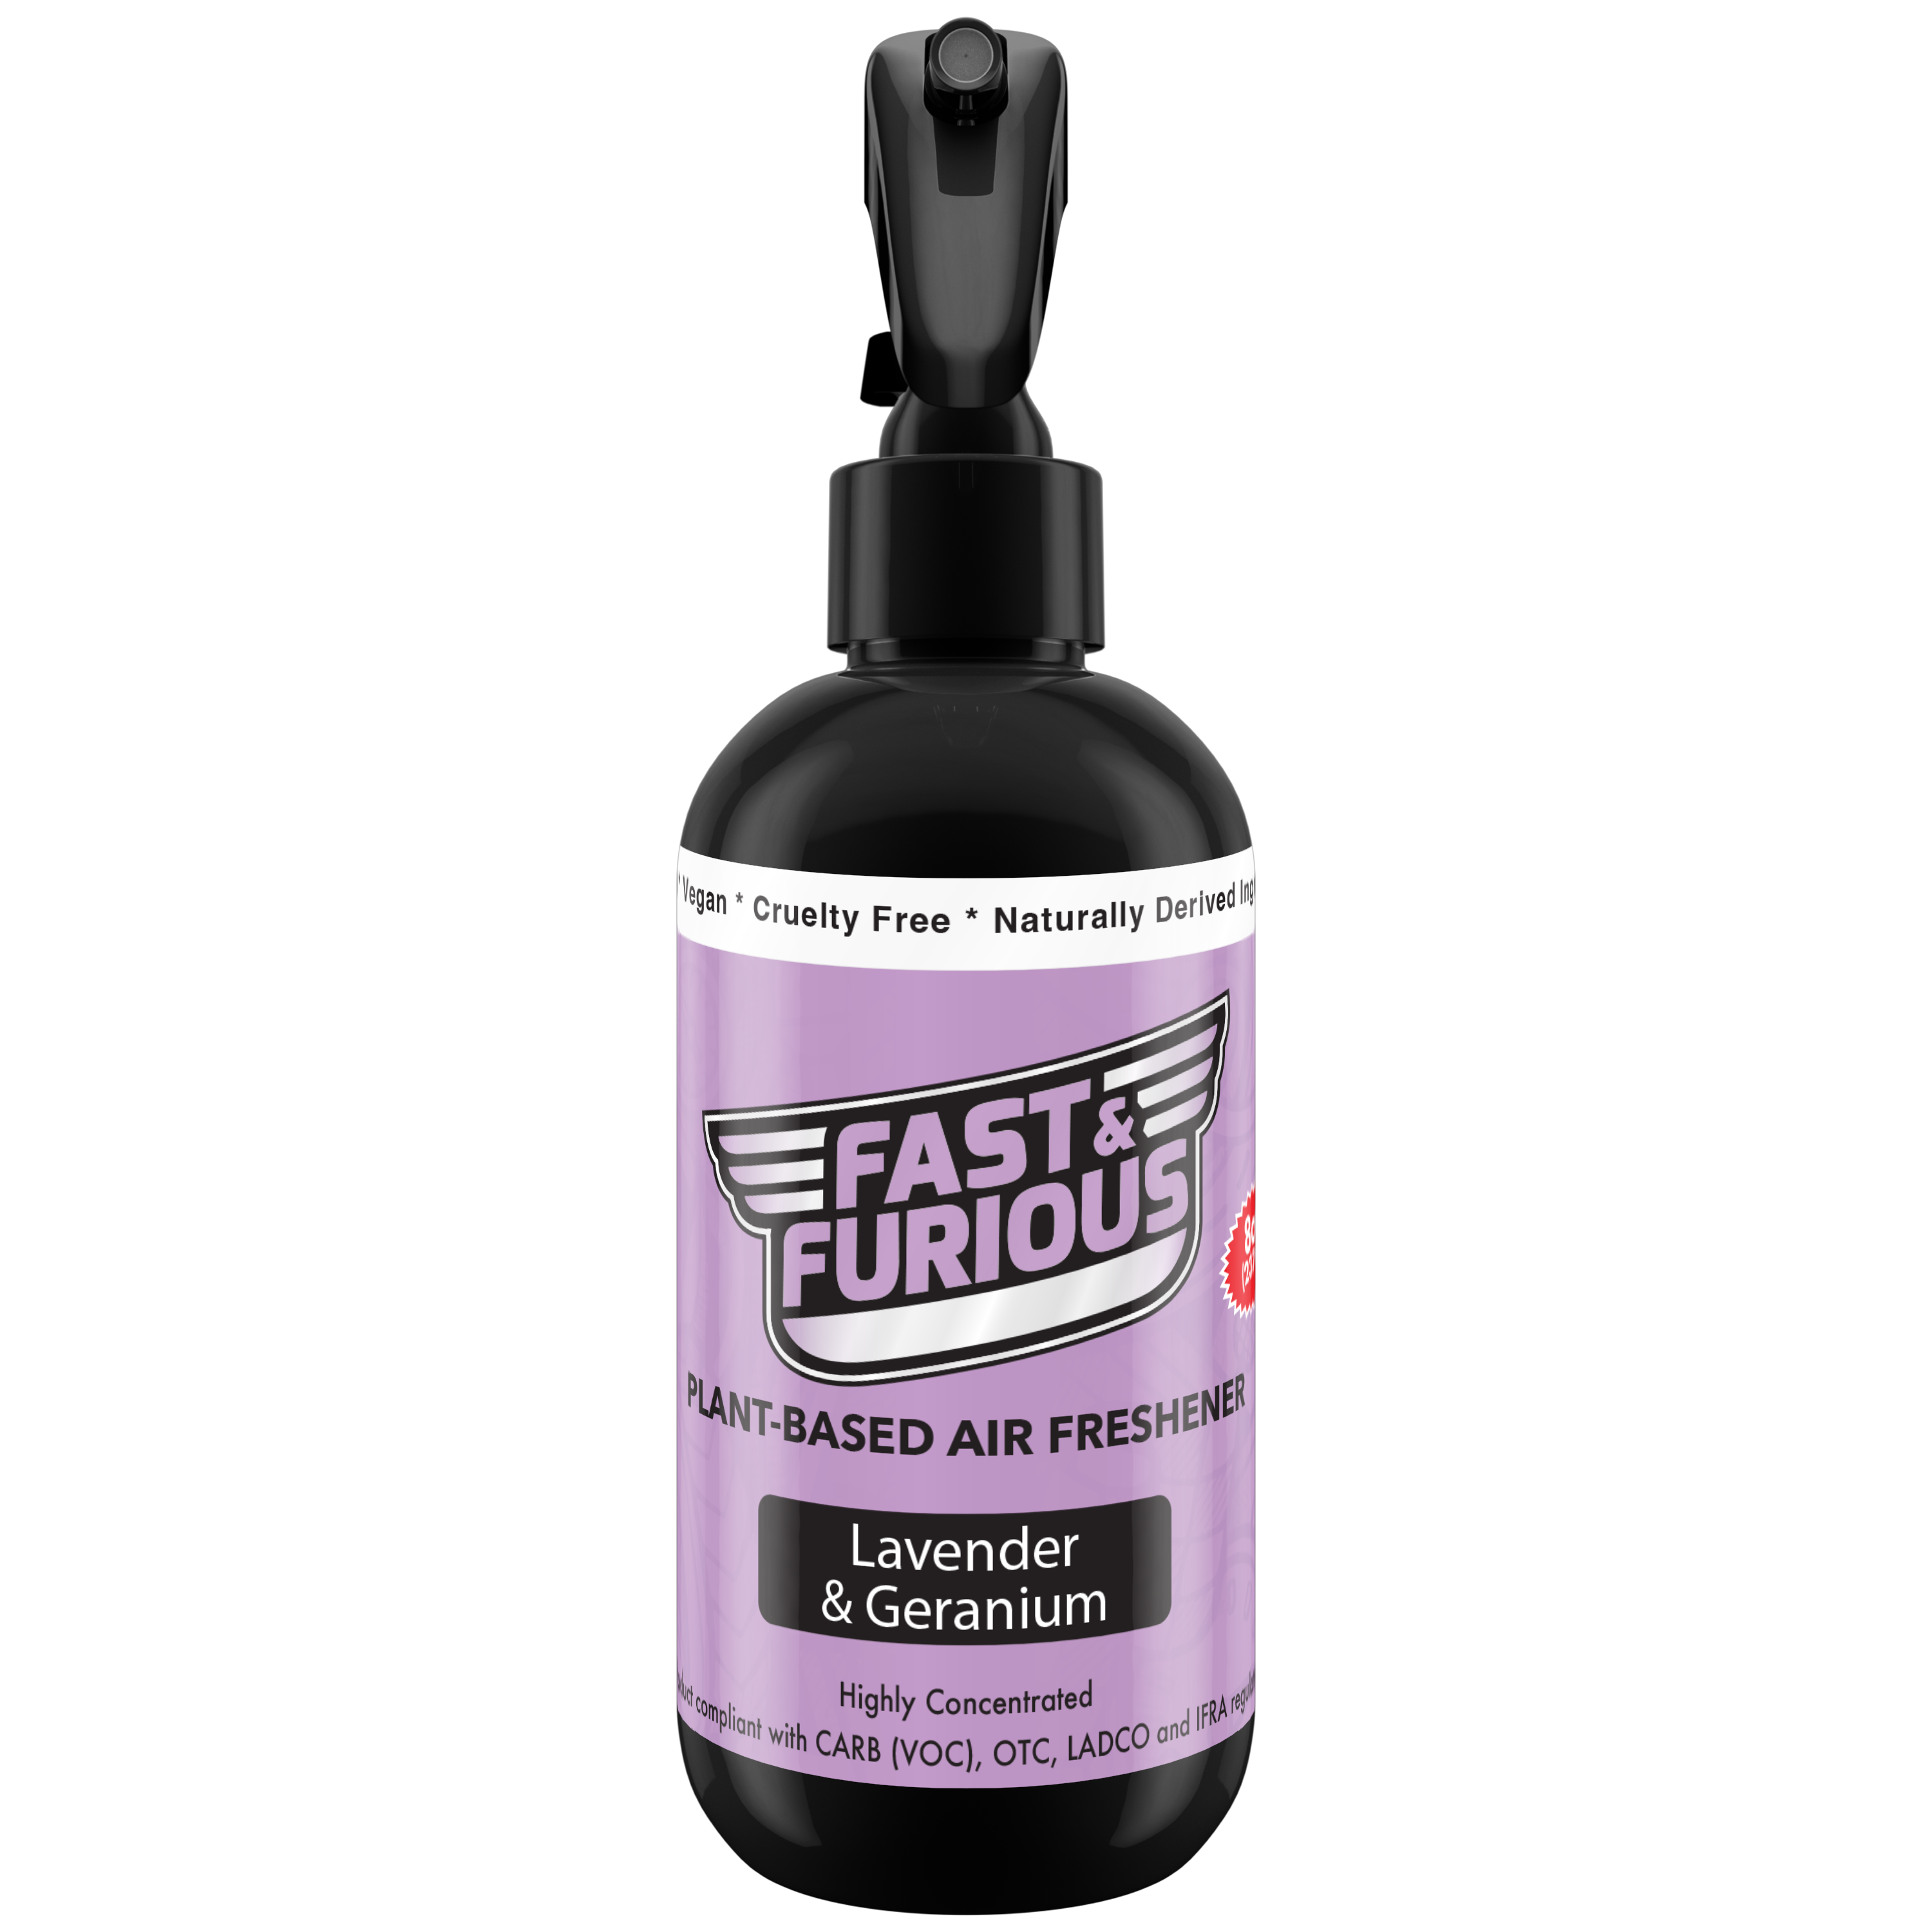 Fast and Furious Plant-Based Air Freshener - Lavender & Geranium Scent